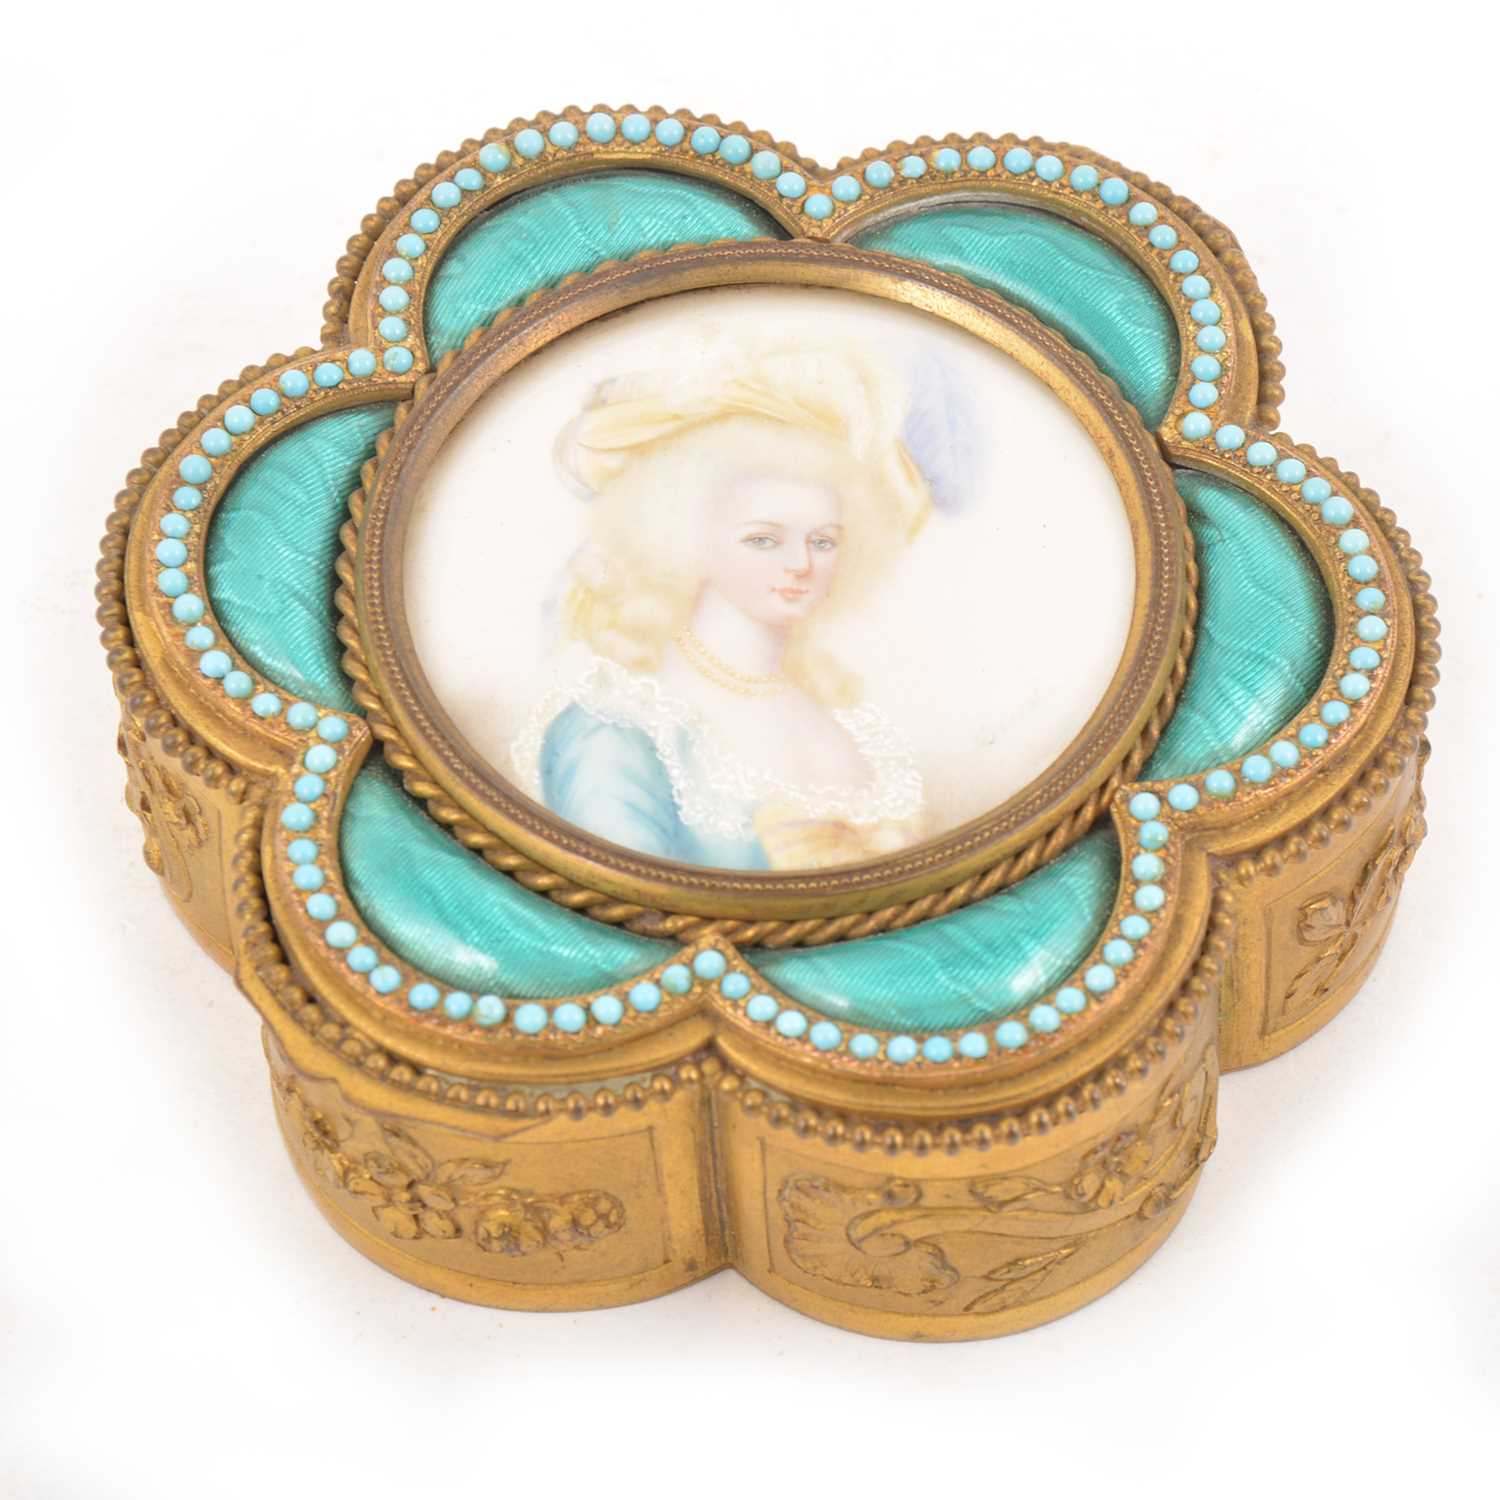 Lot 102 - A gilt metal and enamelled trinket box, inset with a portrait miniature on ivory roundel